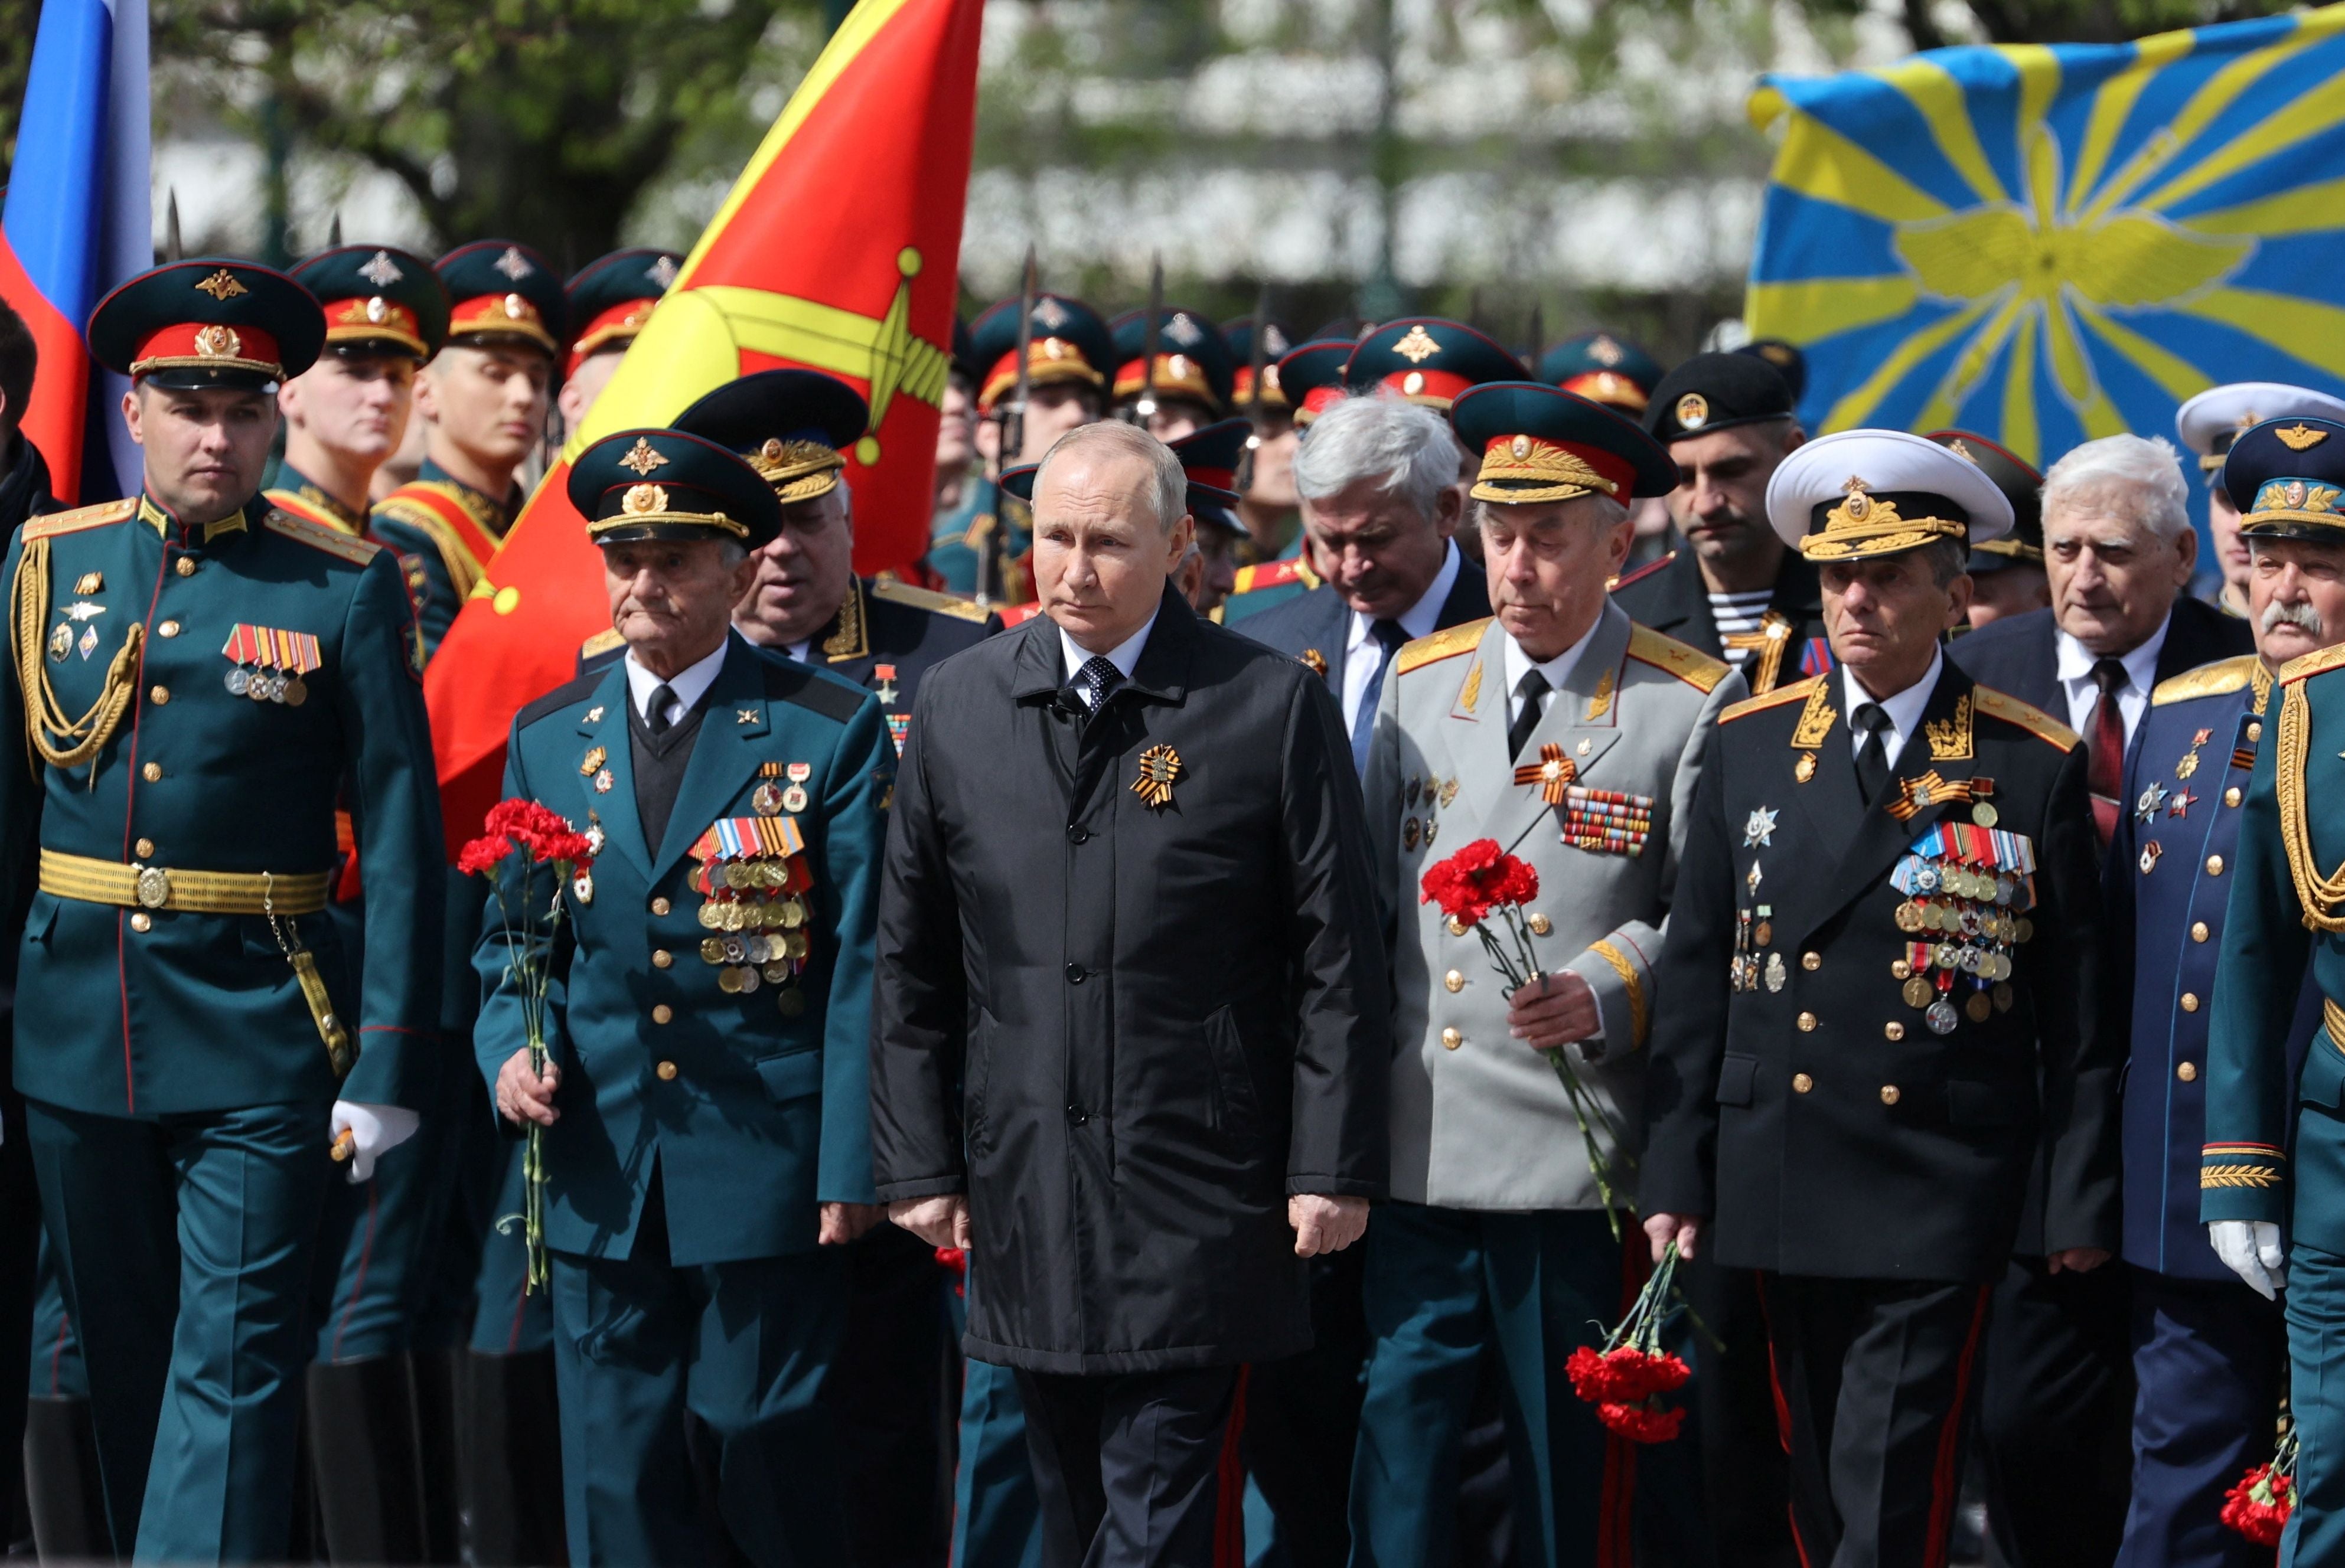 Putin lashed out at the West during his Victory Day speech